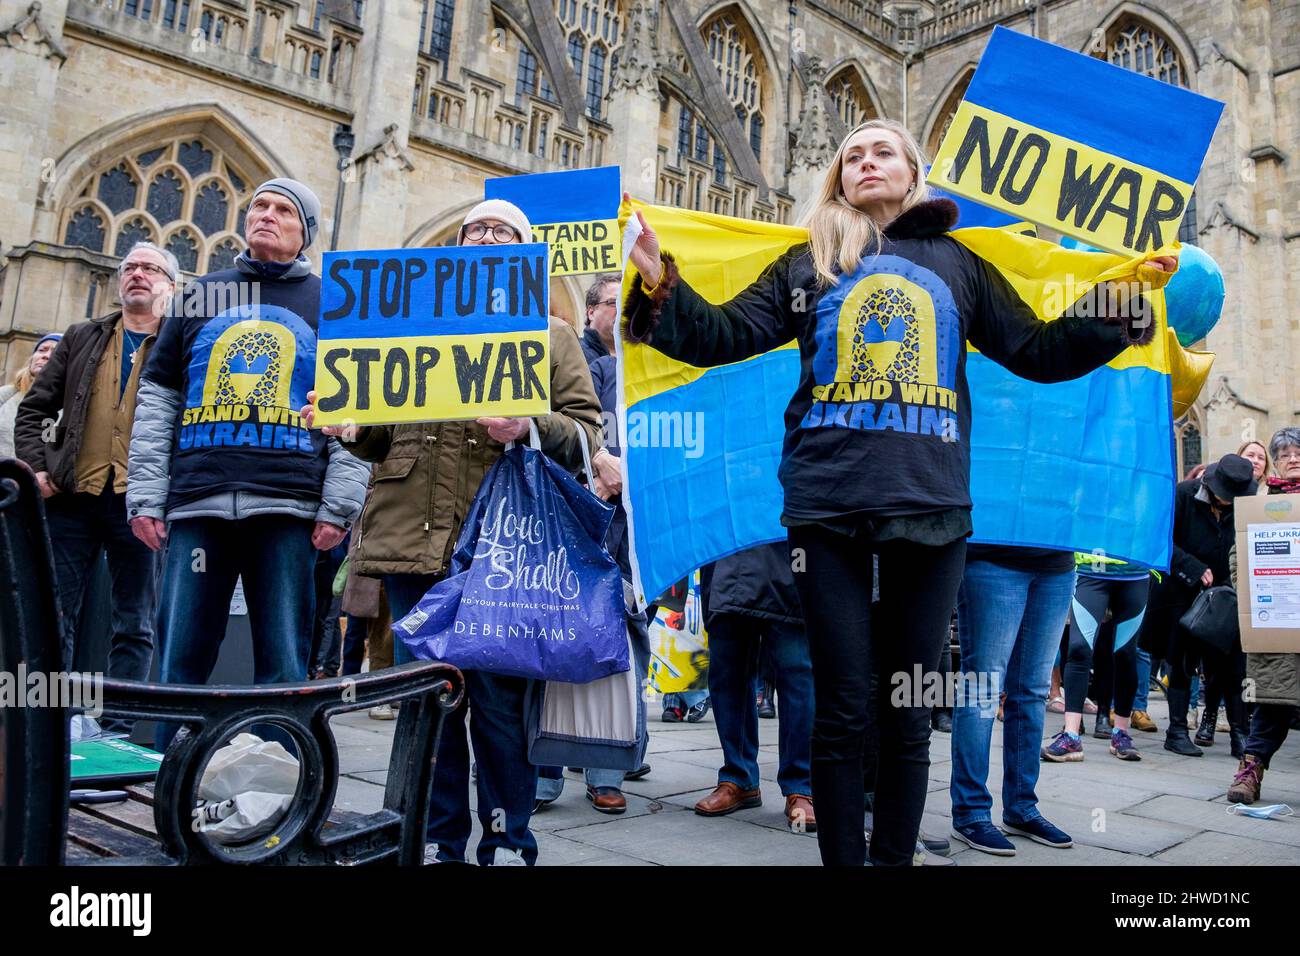 Bath, UK. 5th March, 2022. Protestors hold anti-Putin and stop the war placards as they listen to speeches in front of Bath Abbey during a demonstration against Russia's invasion of Ukraine. The demonstration was organised in order to allow local people to show their solidarity with Ukraine in the Russia-Ukraine war and to condemn Putin's actions. Credit: Lynchpics/Alamy Live News Stock Photo